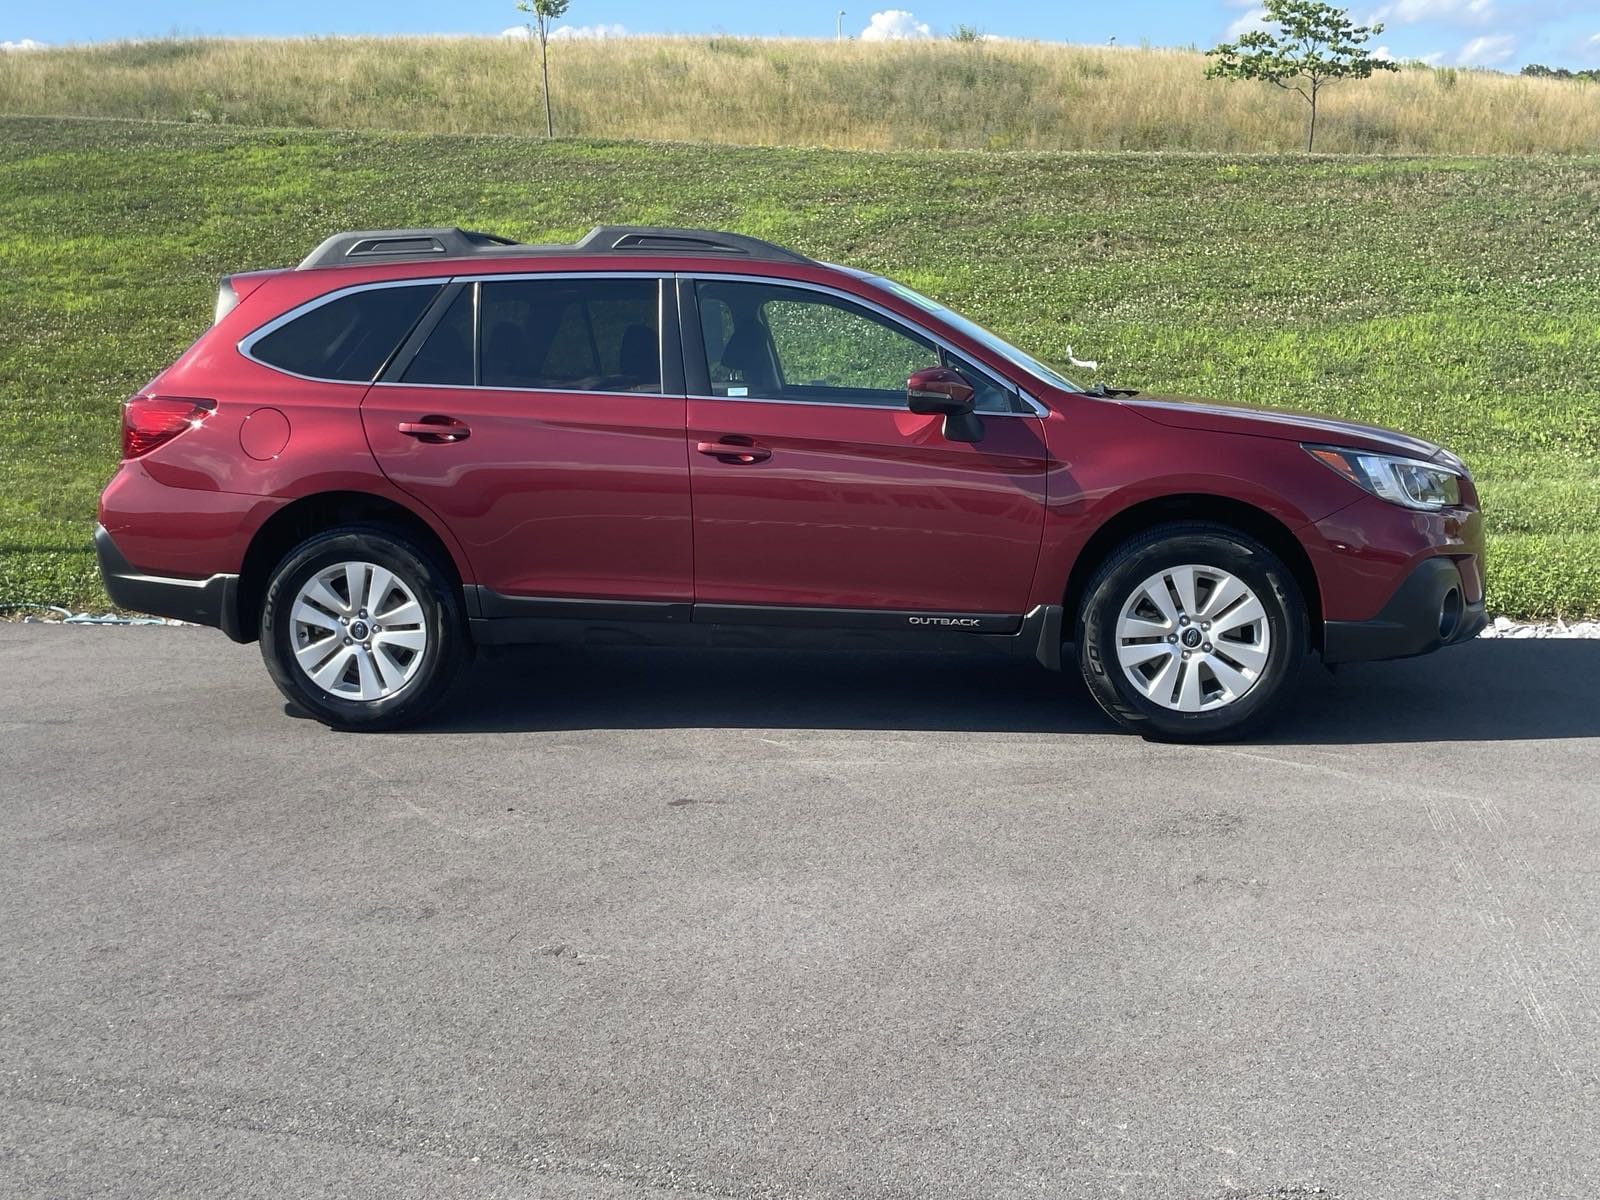 Used 2018 Subaru Outback Premium with VIN 4S4BSAFC6J3203075 for sale in Muncy, PA